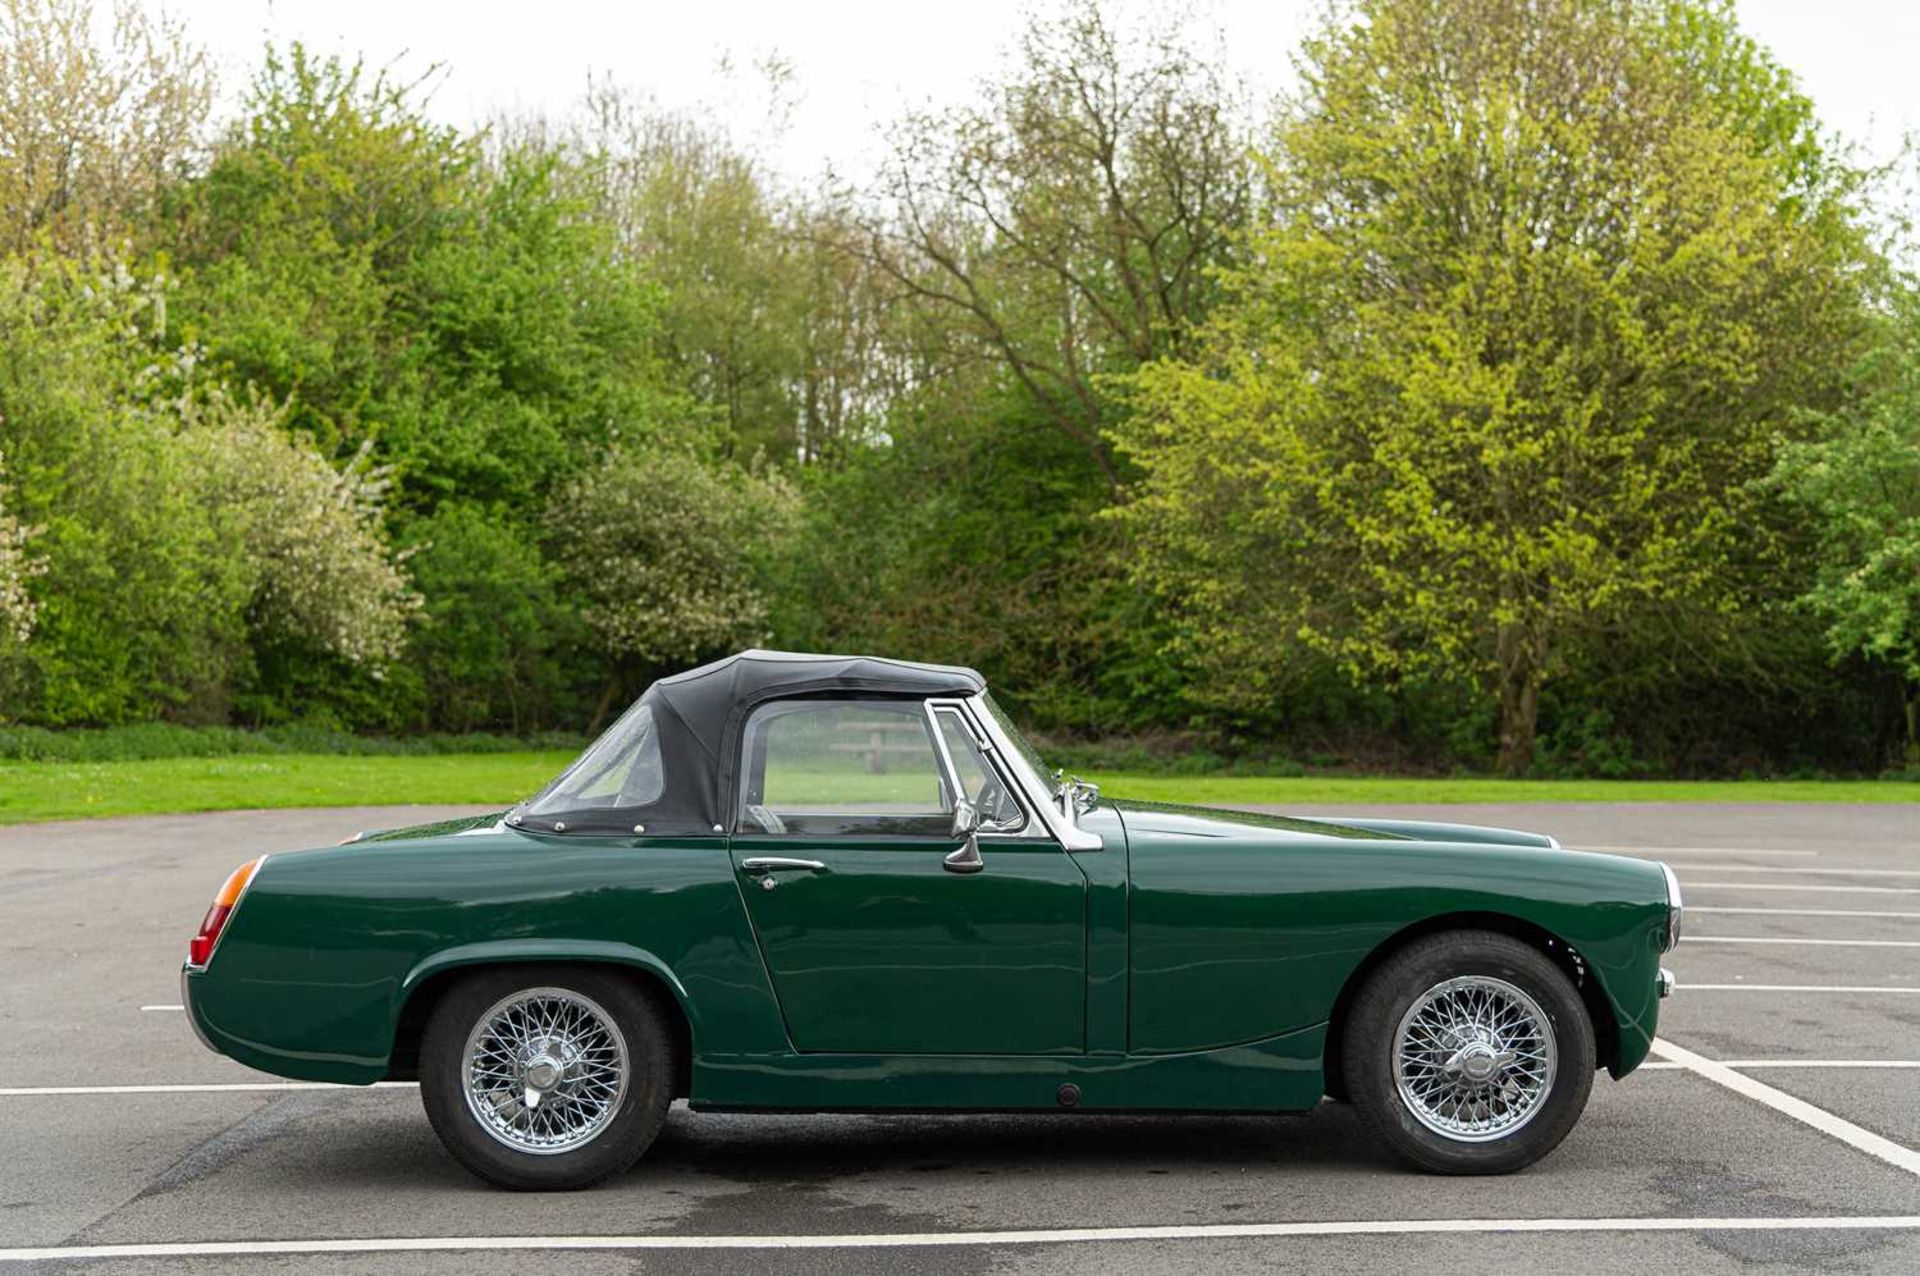 1965 Austin-Healey Sprite Formerly the property of British Formula One racing driver David Piper - Image 15 of 71